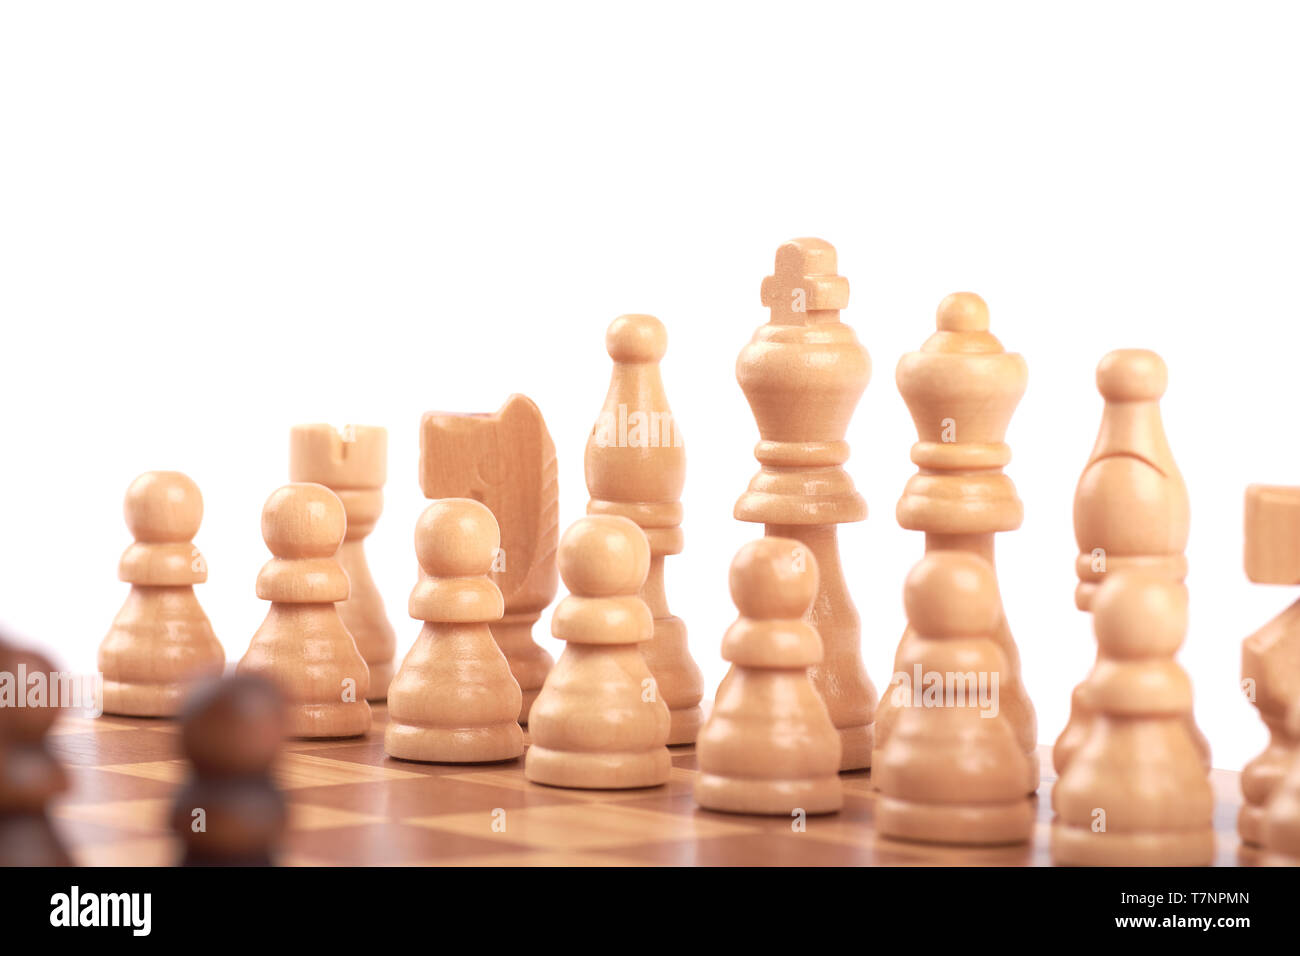 Set of white and black wooden chess pieces standing in a row on a chessboard, isolated on white background Stock Photo